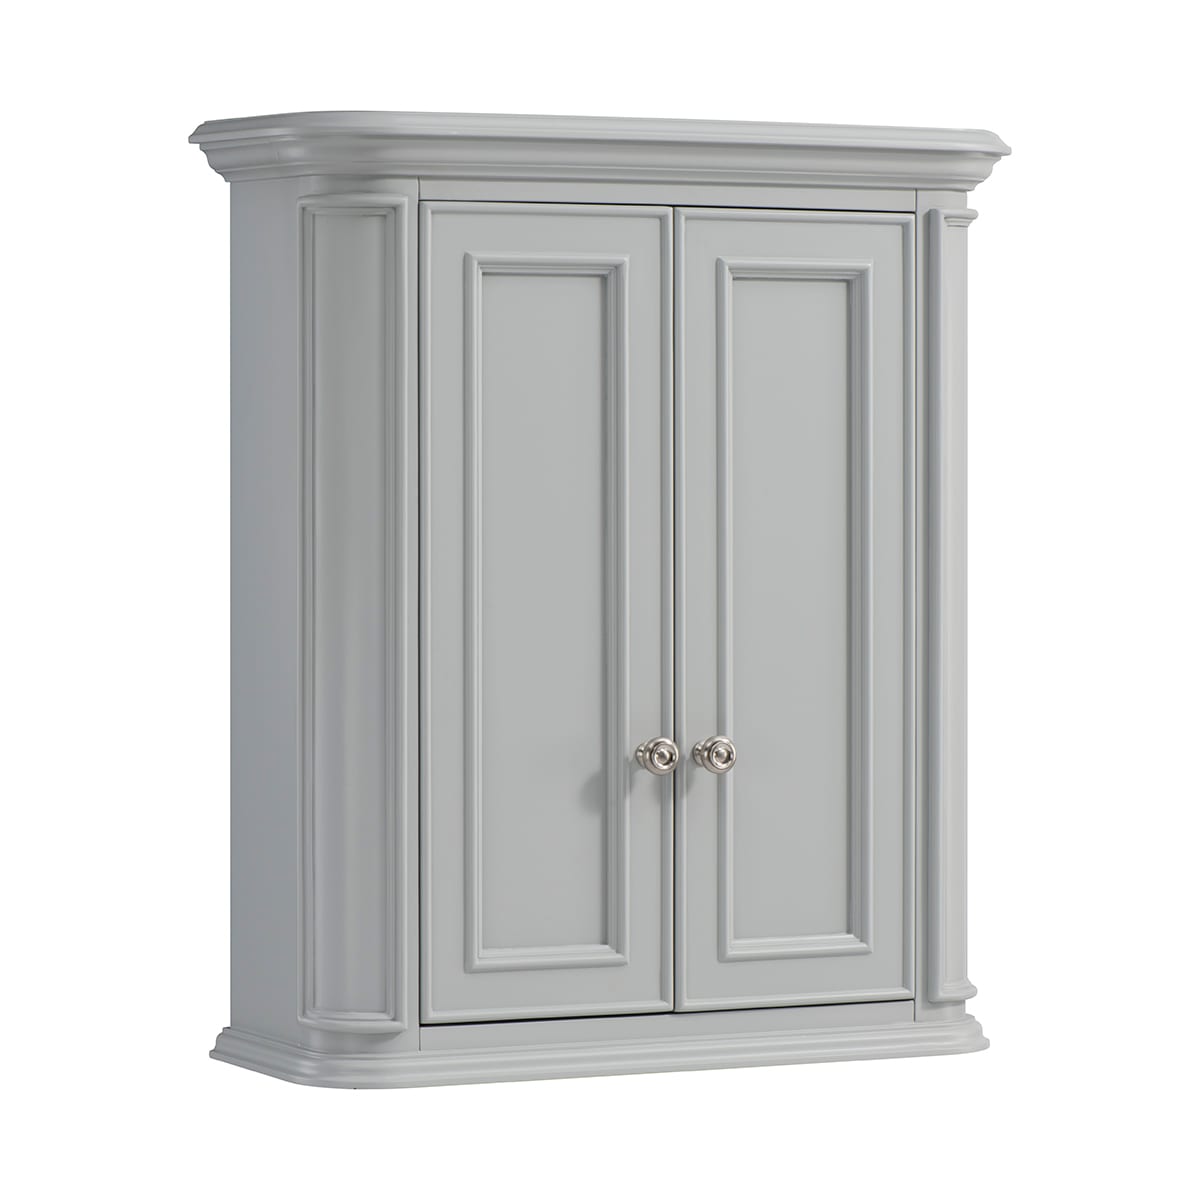 Wrightsville 26-in x 30-in x 10-in Light Gray Soft Close Bathroom Wall Cabinet | - allen + roth 1116WC-26-242